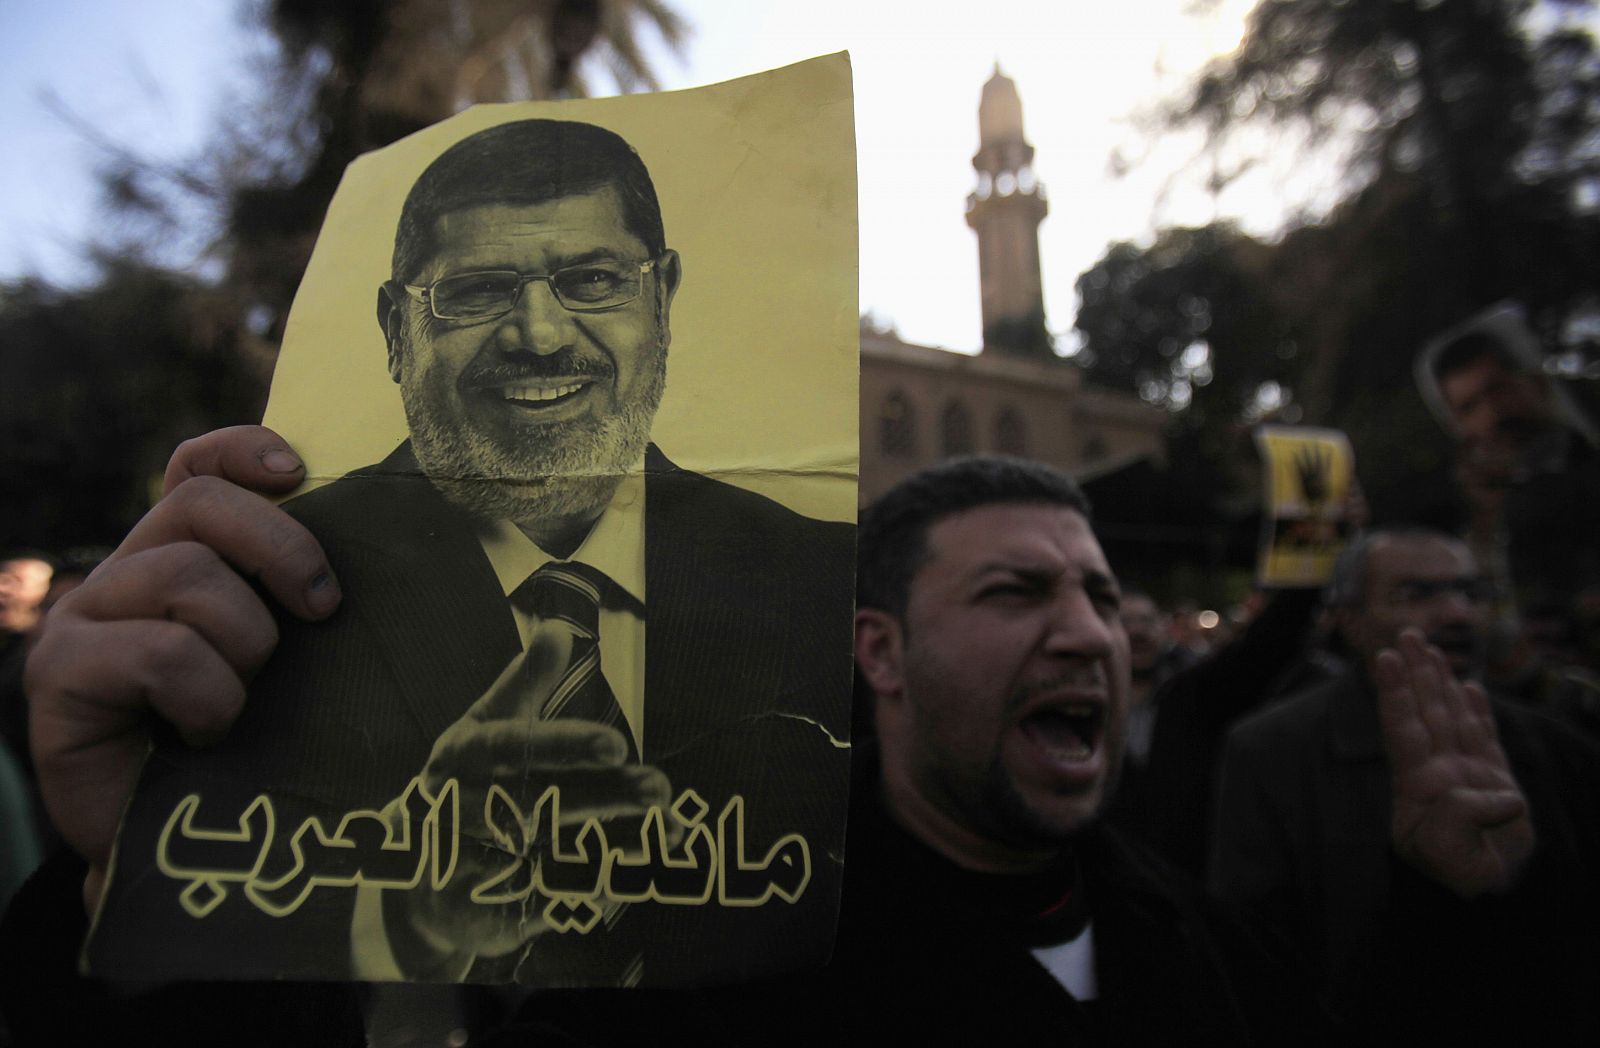 Member of Muslim Brotherhood and supporter of ousted Egyptian President Mursi shouts slogans against military and interior ministry, in front of Al Rayyan mosque after Friday prayers in the southern suburb of Maadi, outskirts of Cairo